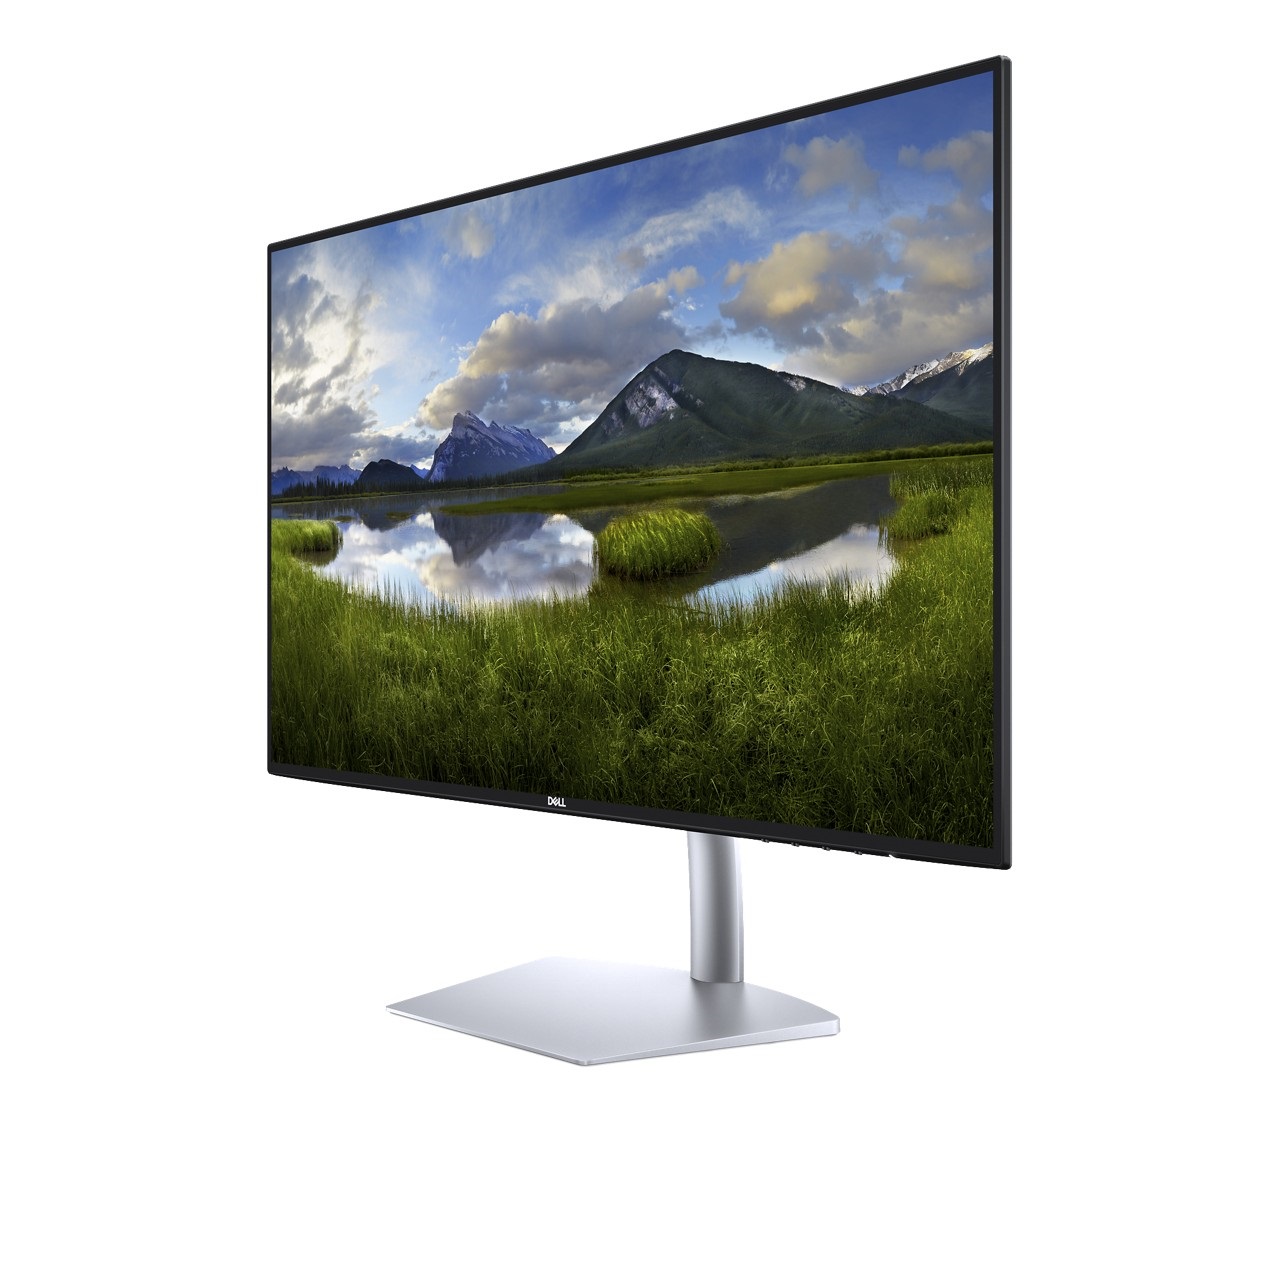 Dell announce new Ultrathin monitors at CES 2018